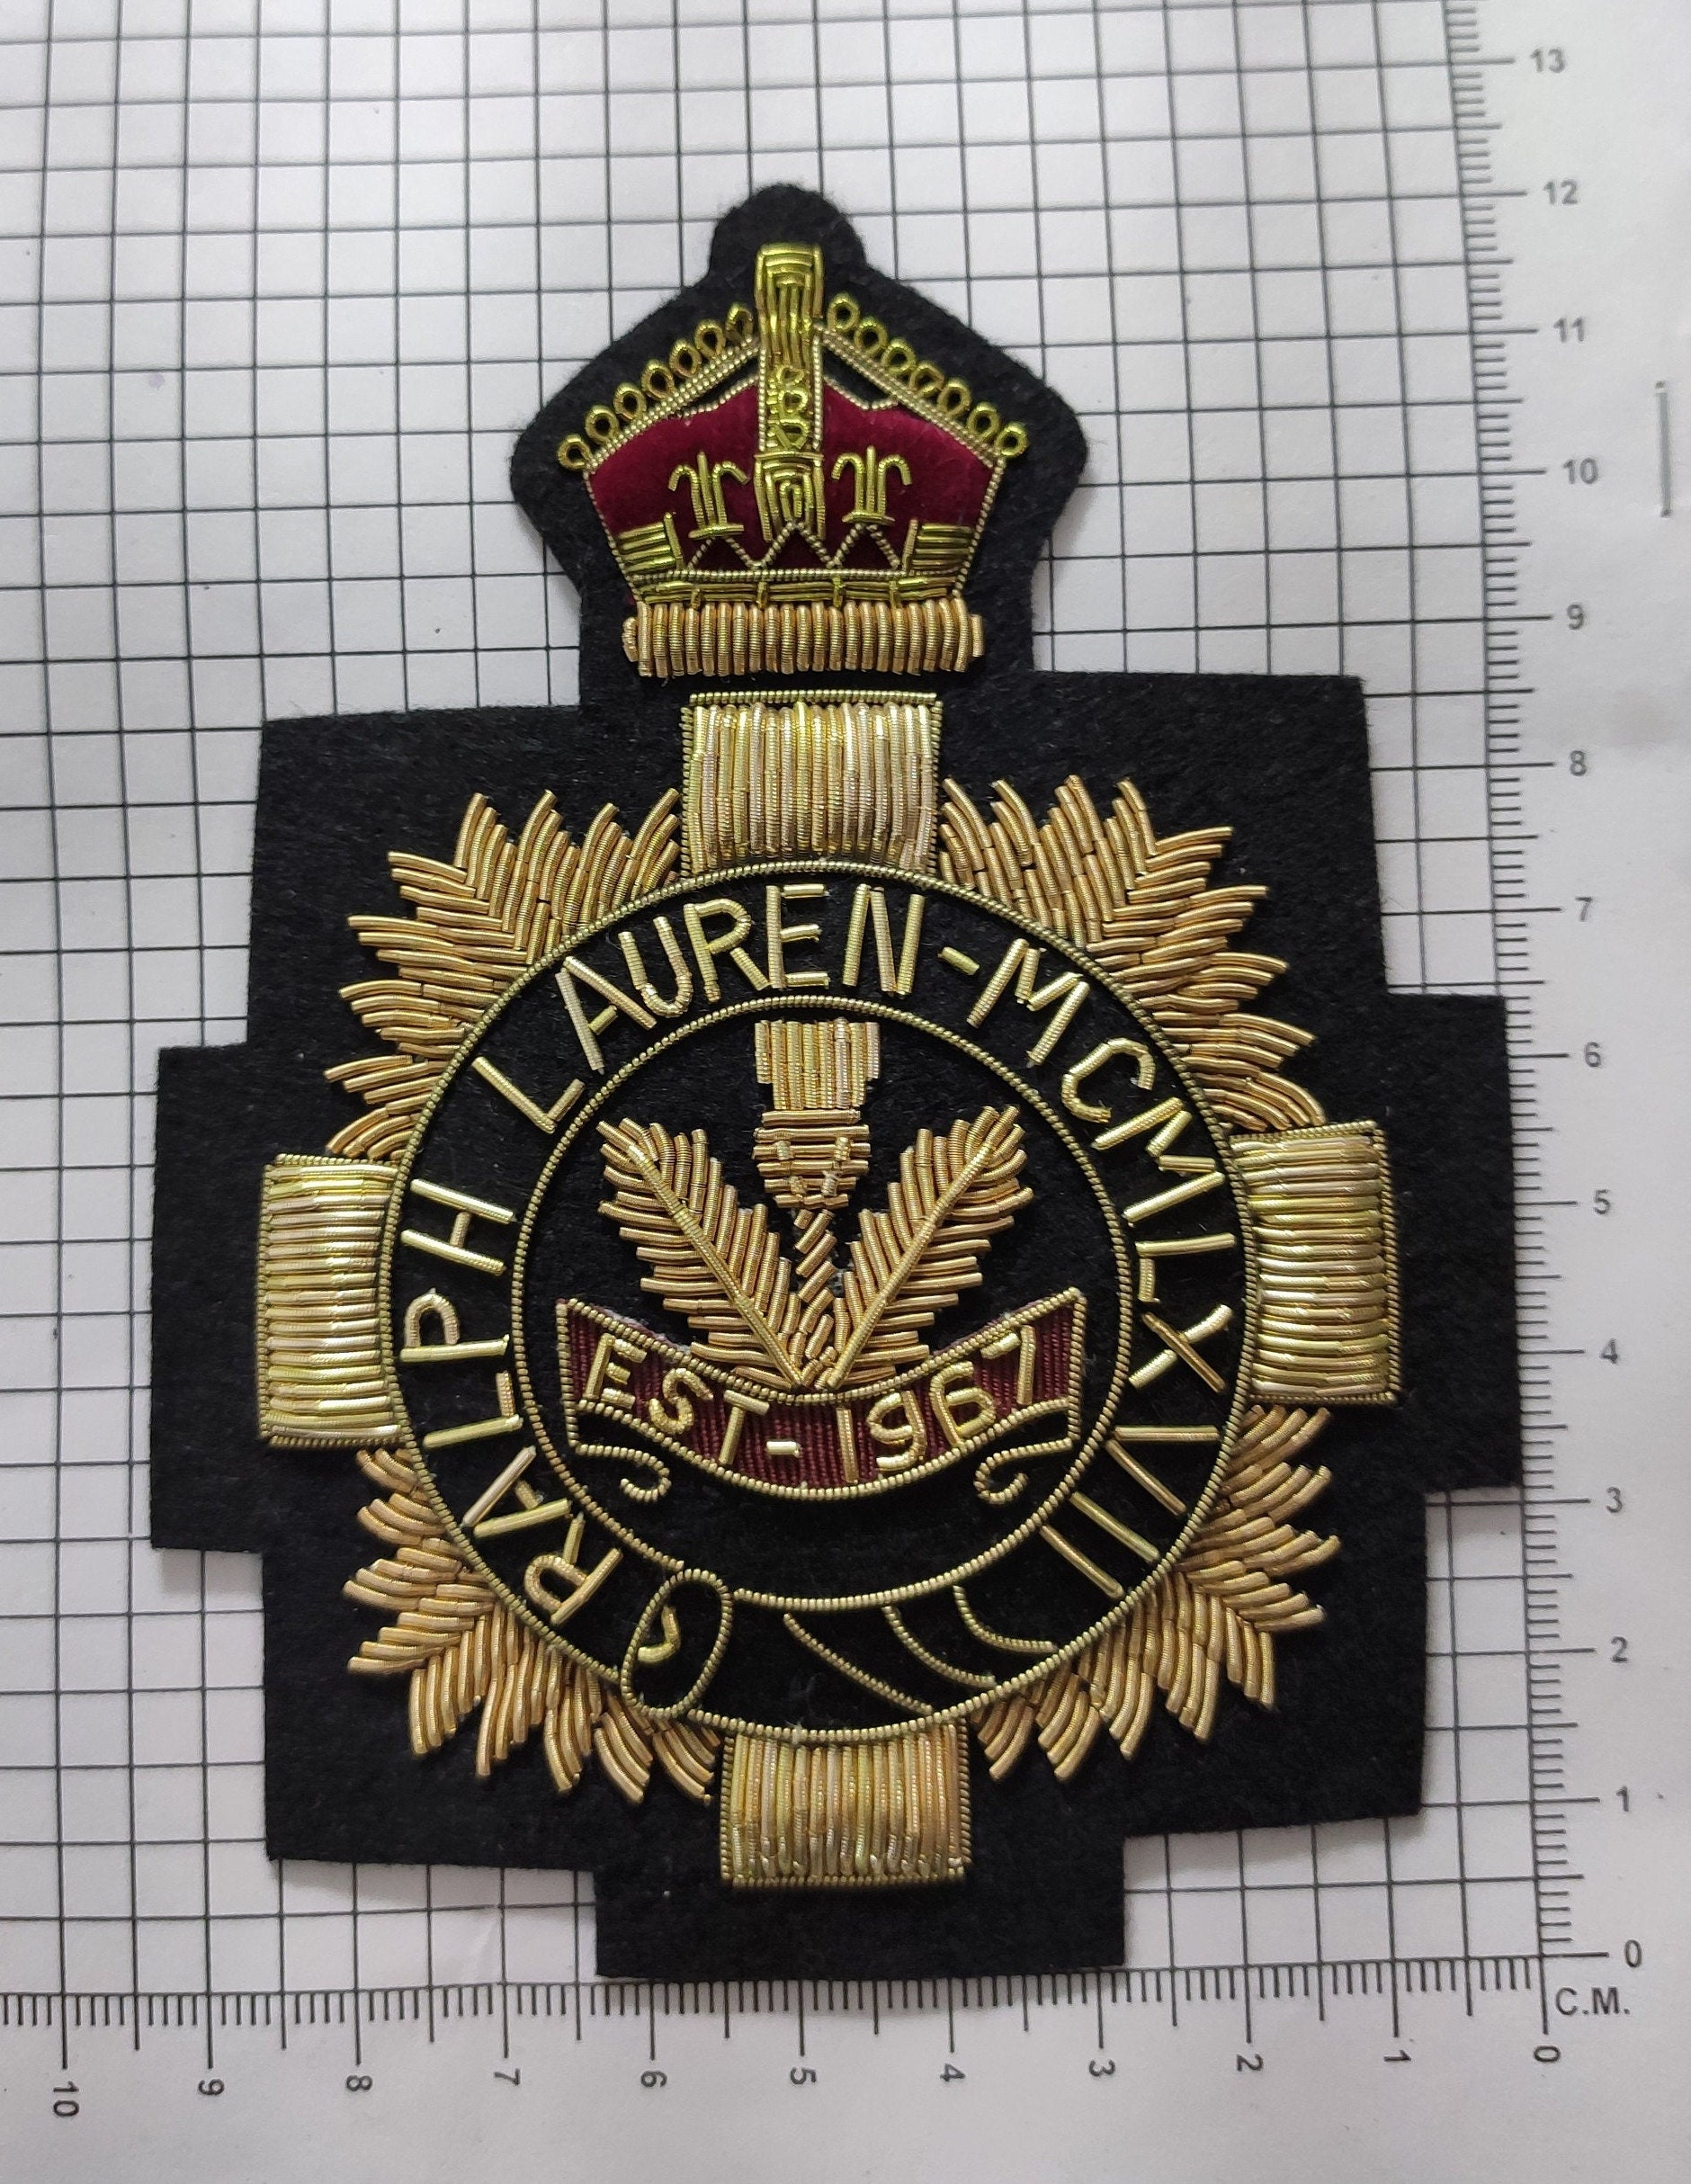 RALPH LAUREN Hand Embroidered Patch/Badge Completely Sewn on | Etsy